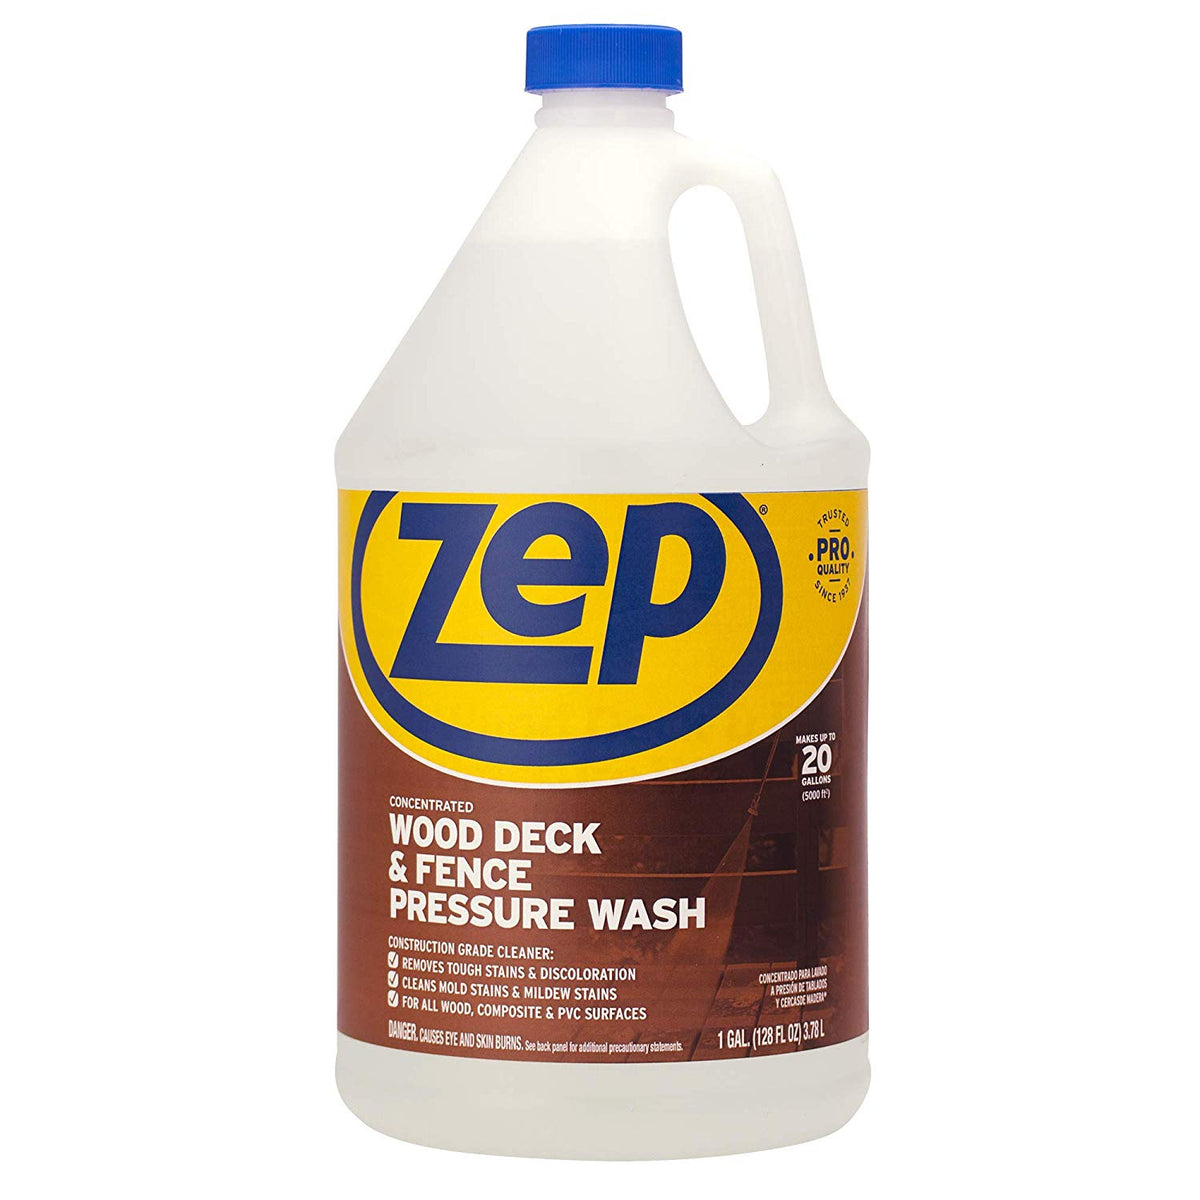 Zep ZUDFW128 Concentrated Wood Deck & Fence Pressure Wash, 1 Gallon